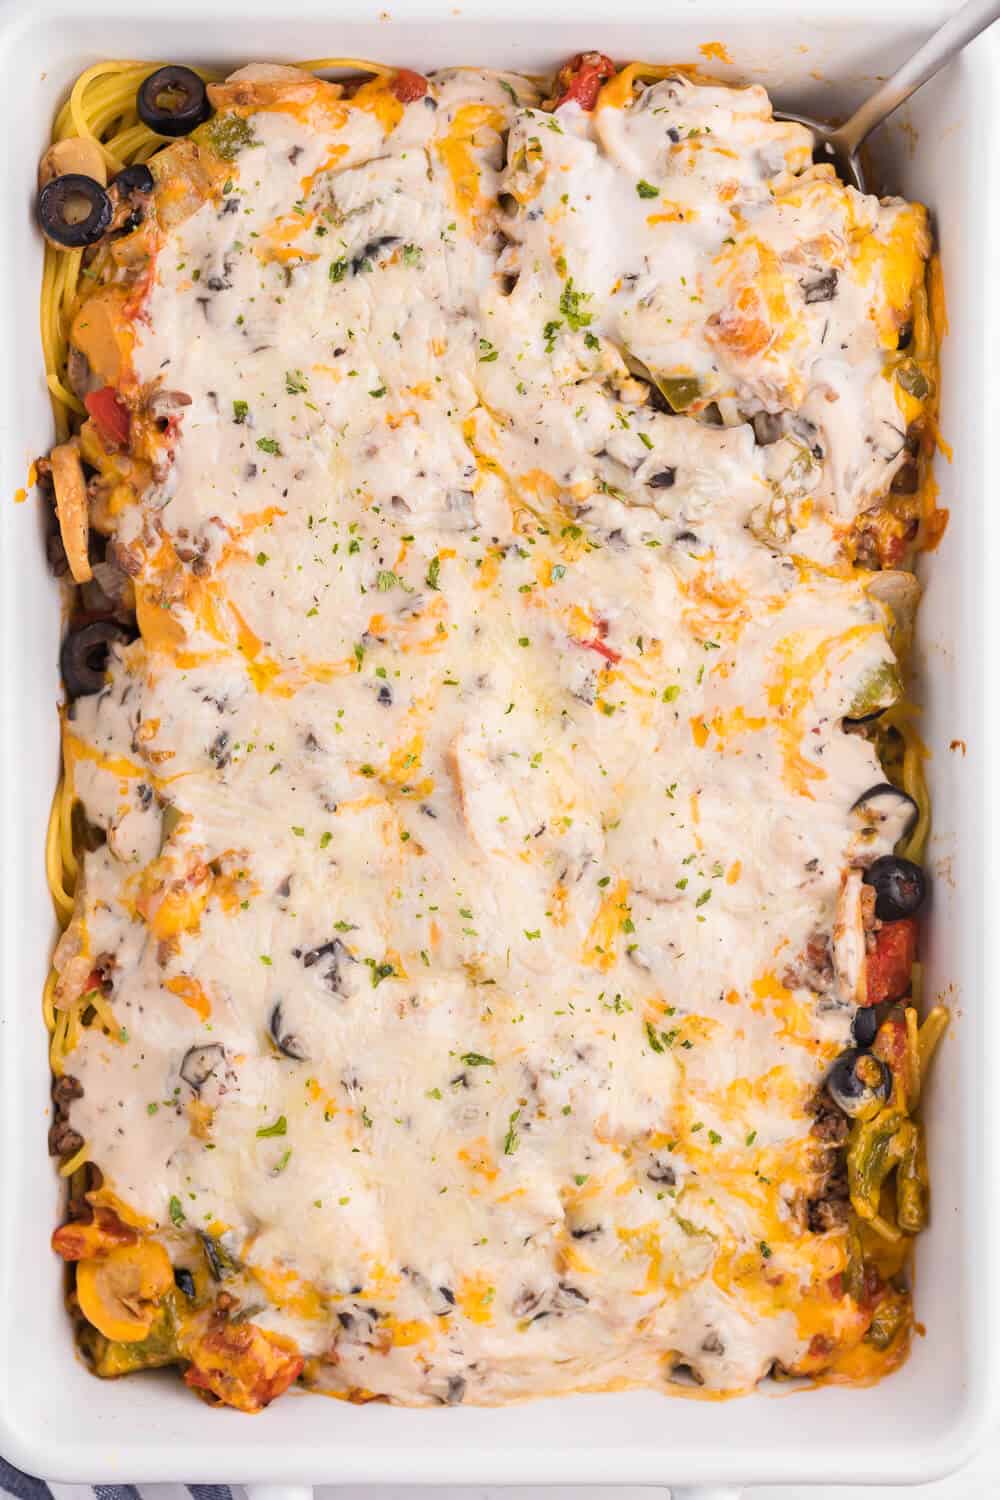 Spaghetti Casserole - Layered pasta, creamy mushroom sauce, diced tomatoes, mushrooms and olives are combined to make a perfect weekend supper.